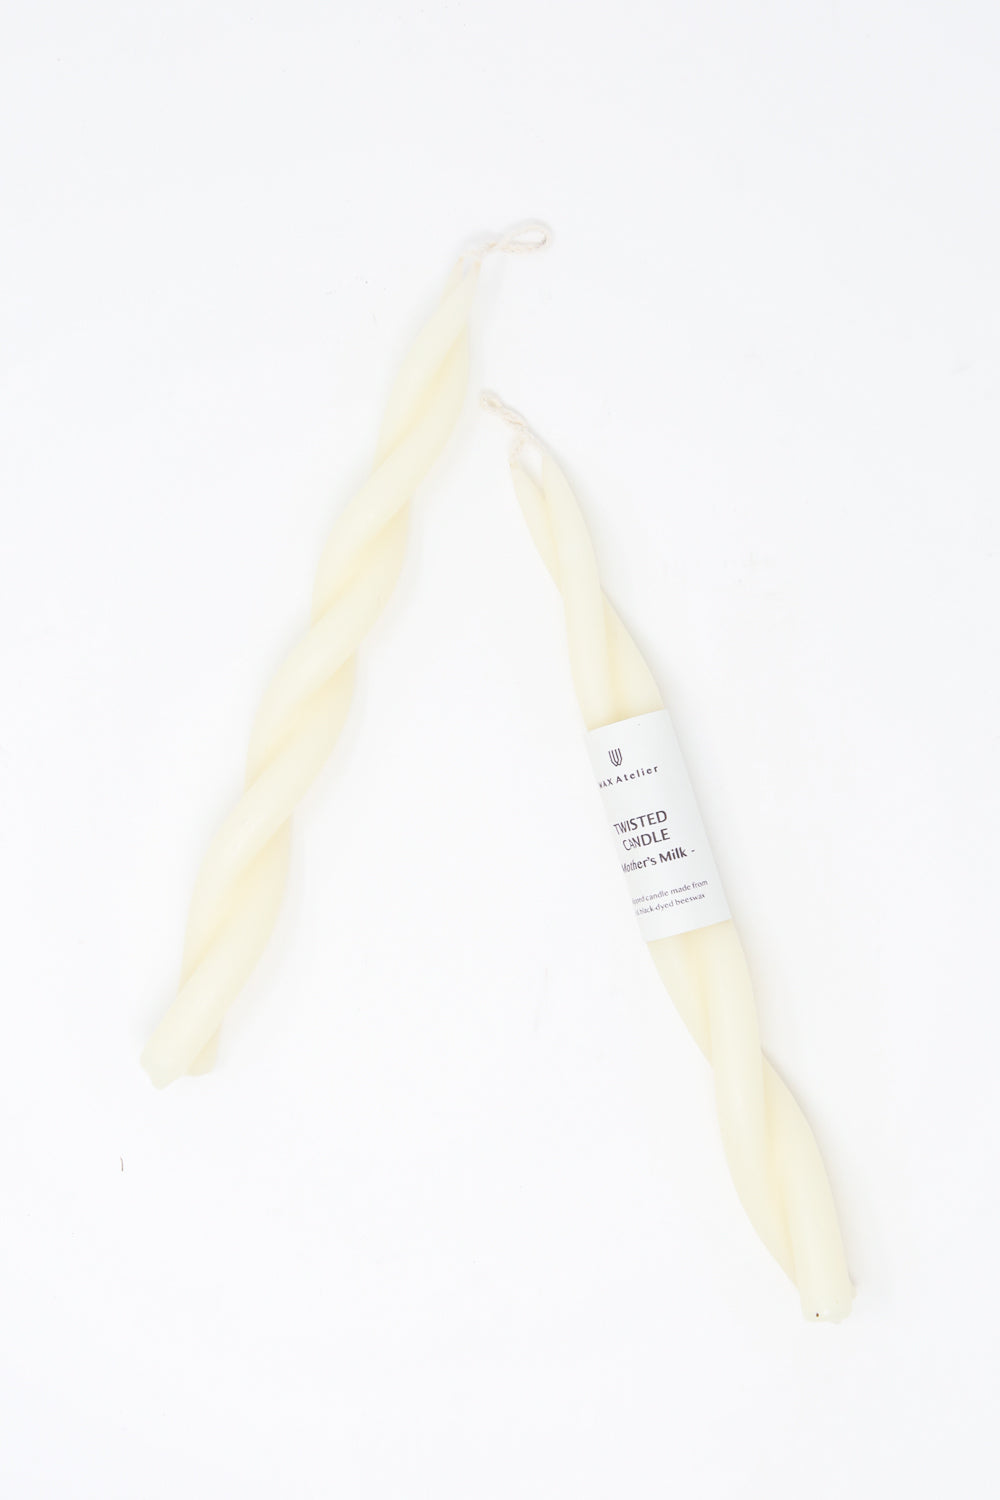 Wax Atelier Hand Twisted Beeswax Candle in Mother's Milk